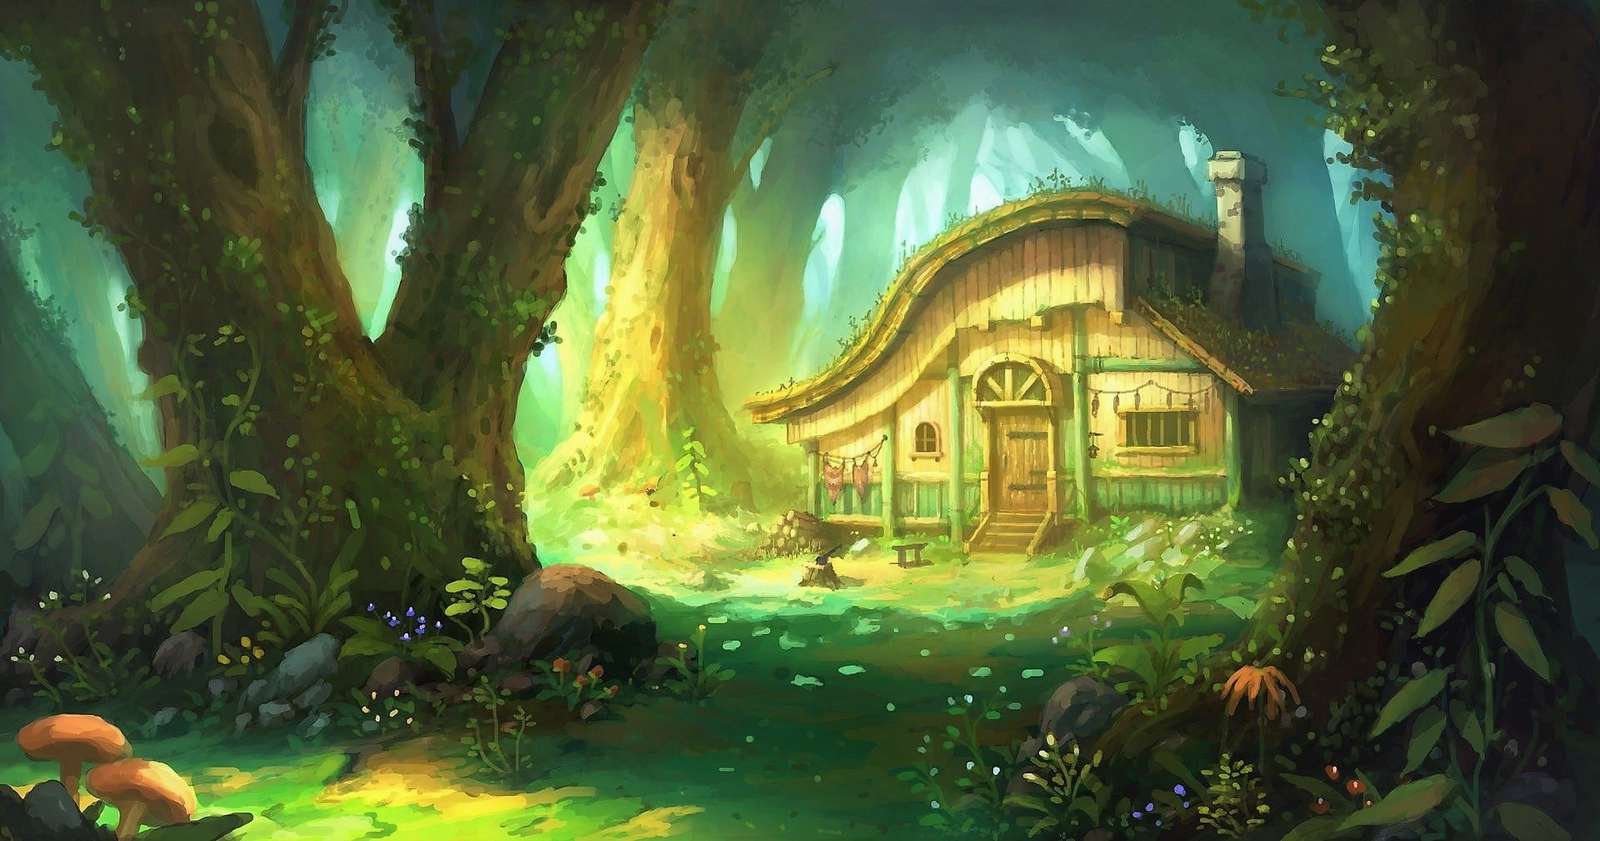 Fairytale forest jigsaw puzzle online